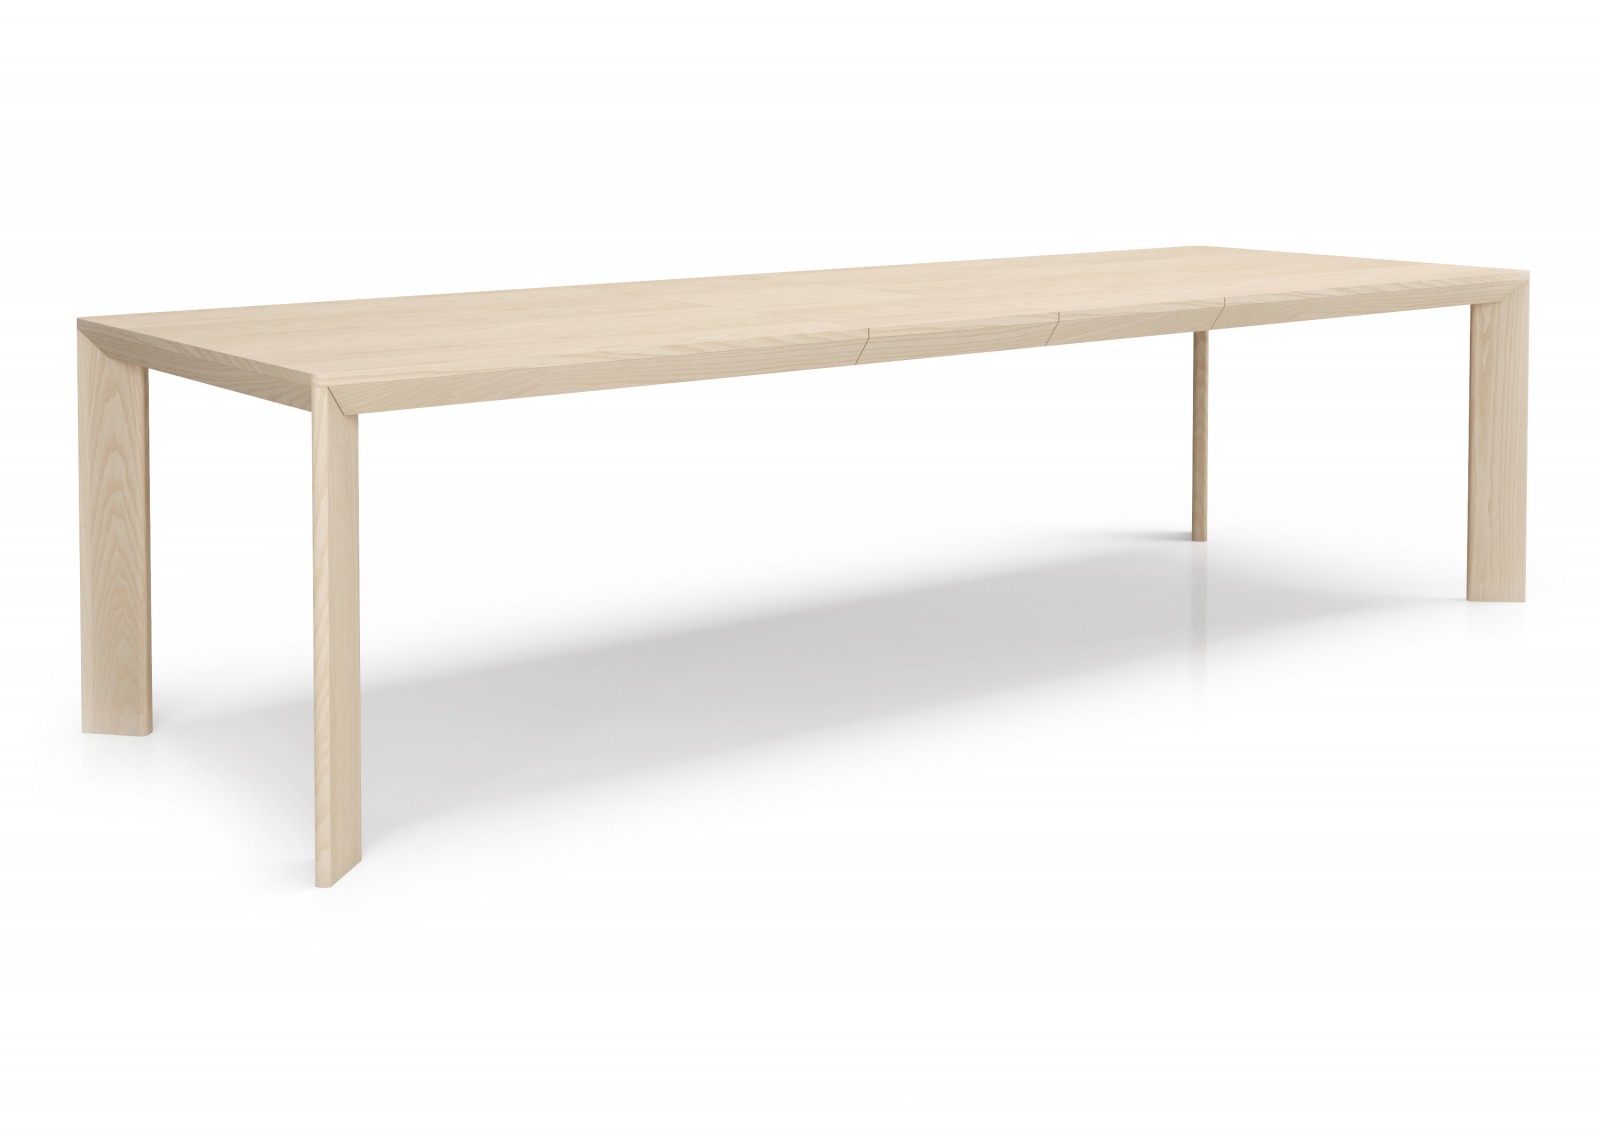 82'' Double extension table